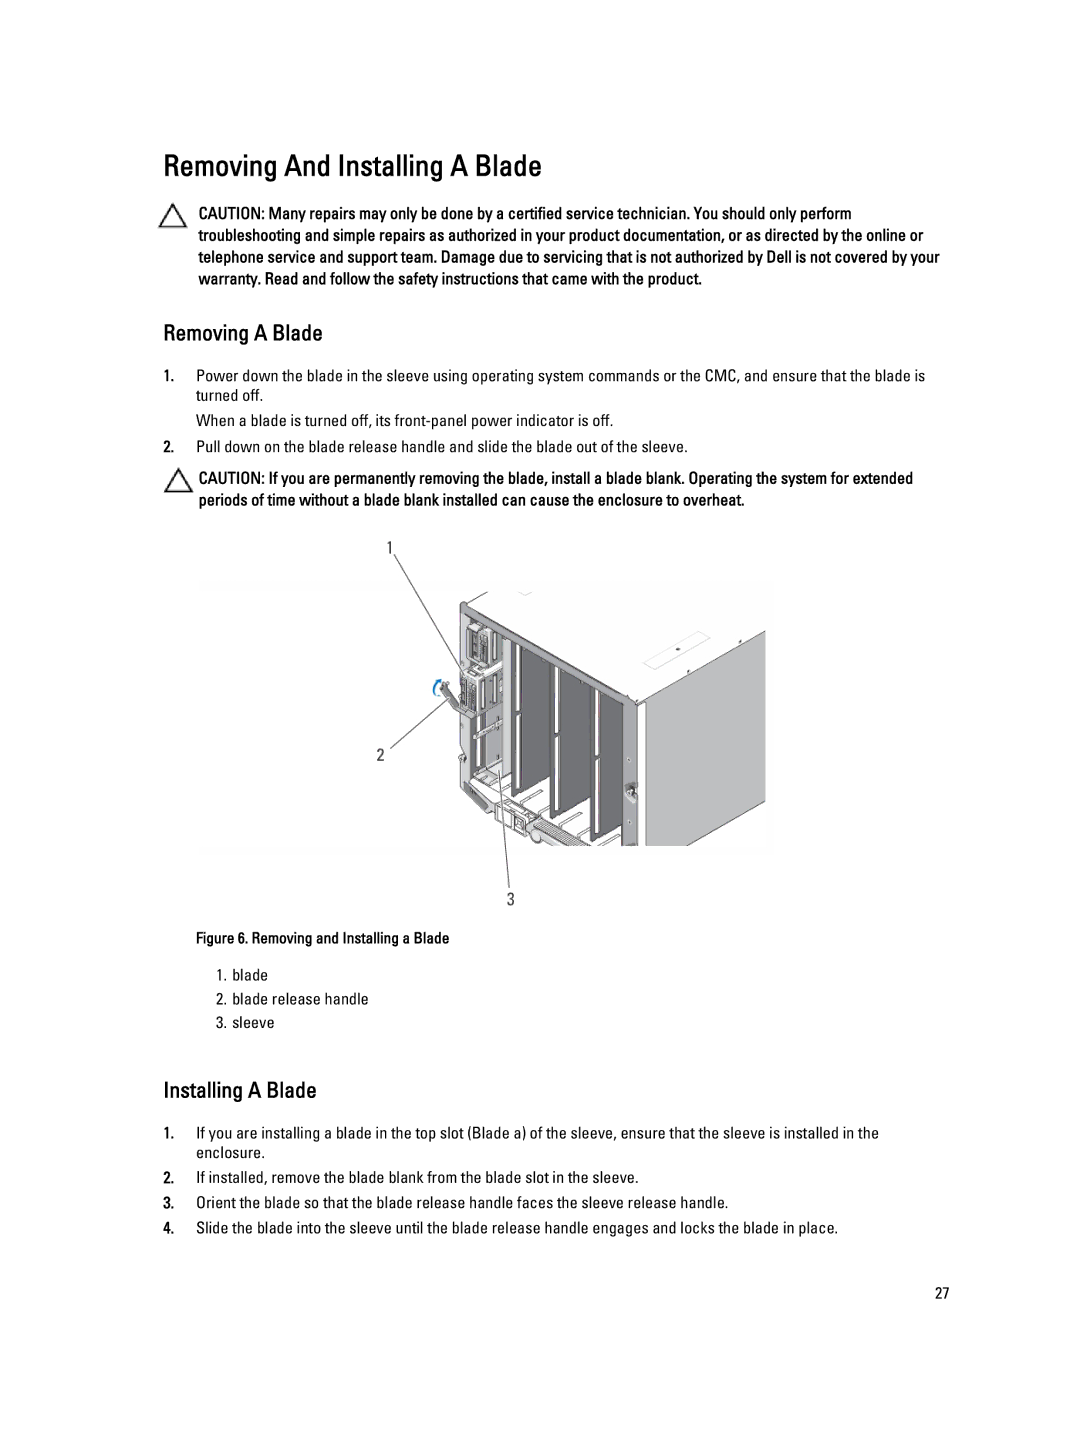 Dell QHB owner manual Removing And Installing a Blade, Removing a Blade 